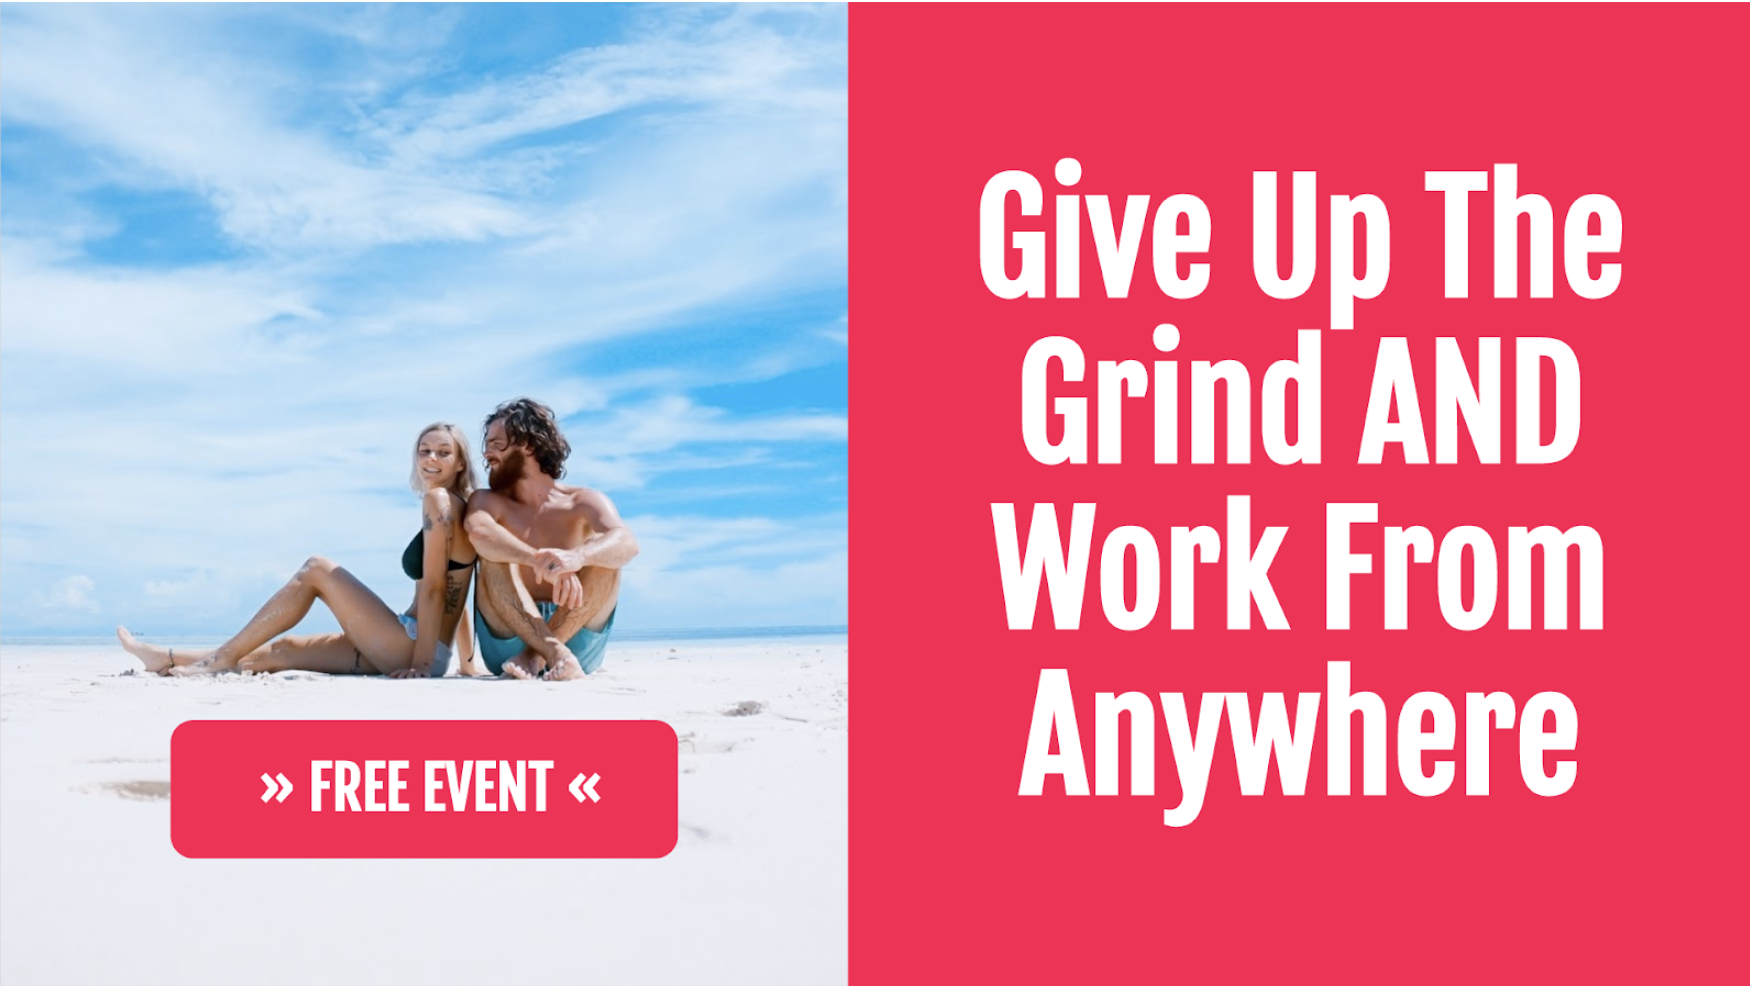 Avoid The Corporate Grind & Earn 6 Figures From Anywhere In The World